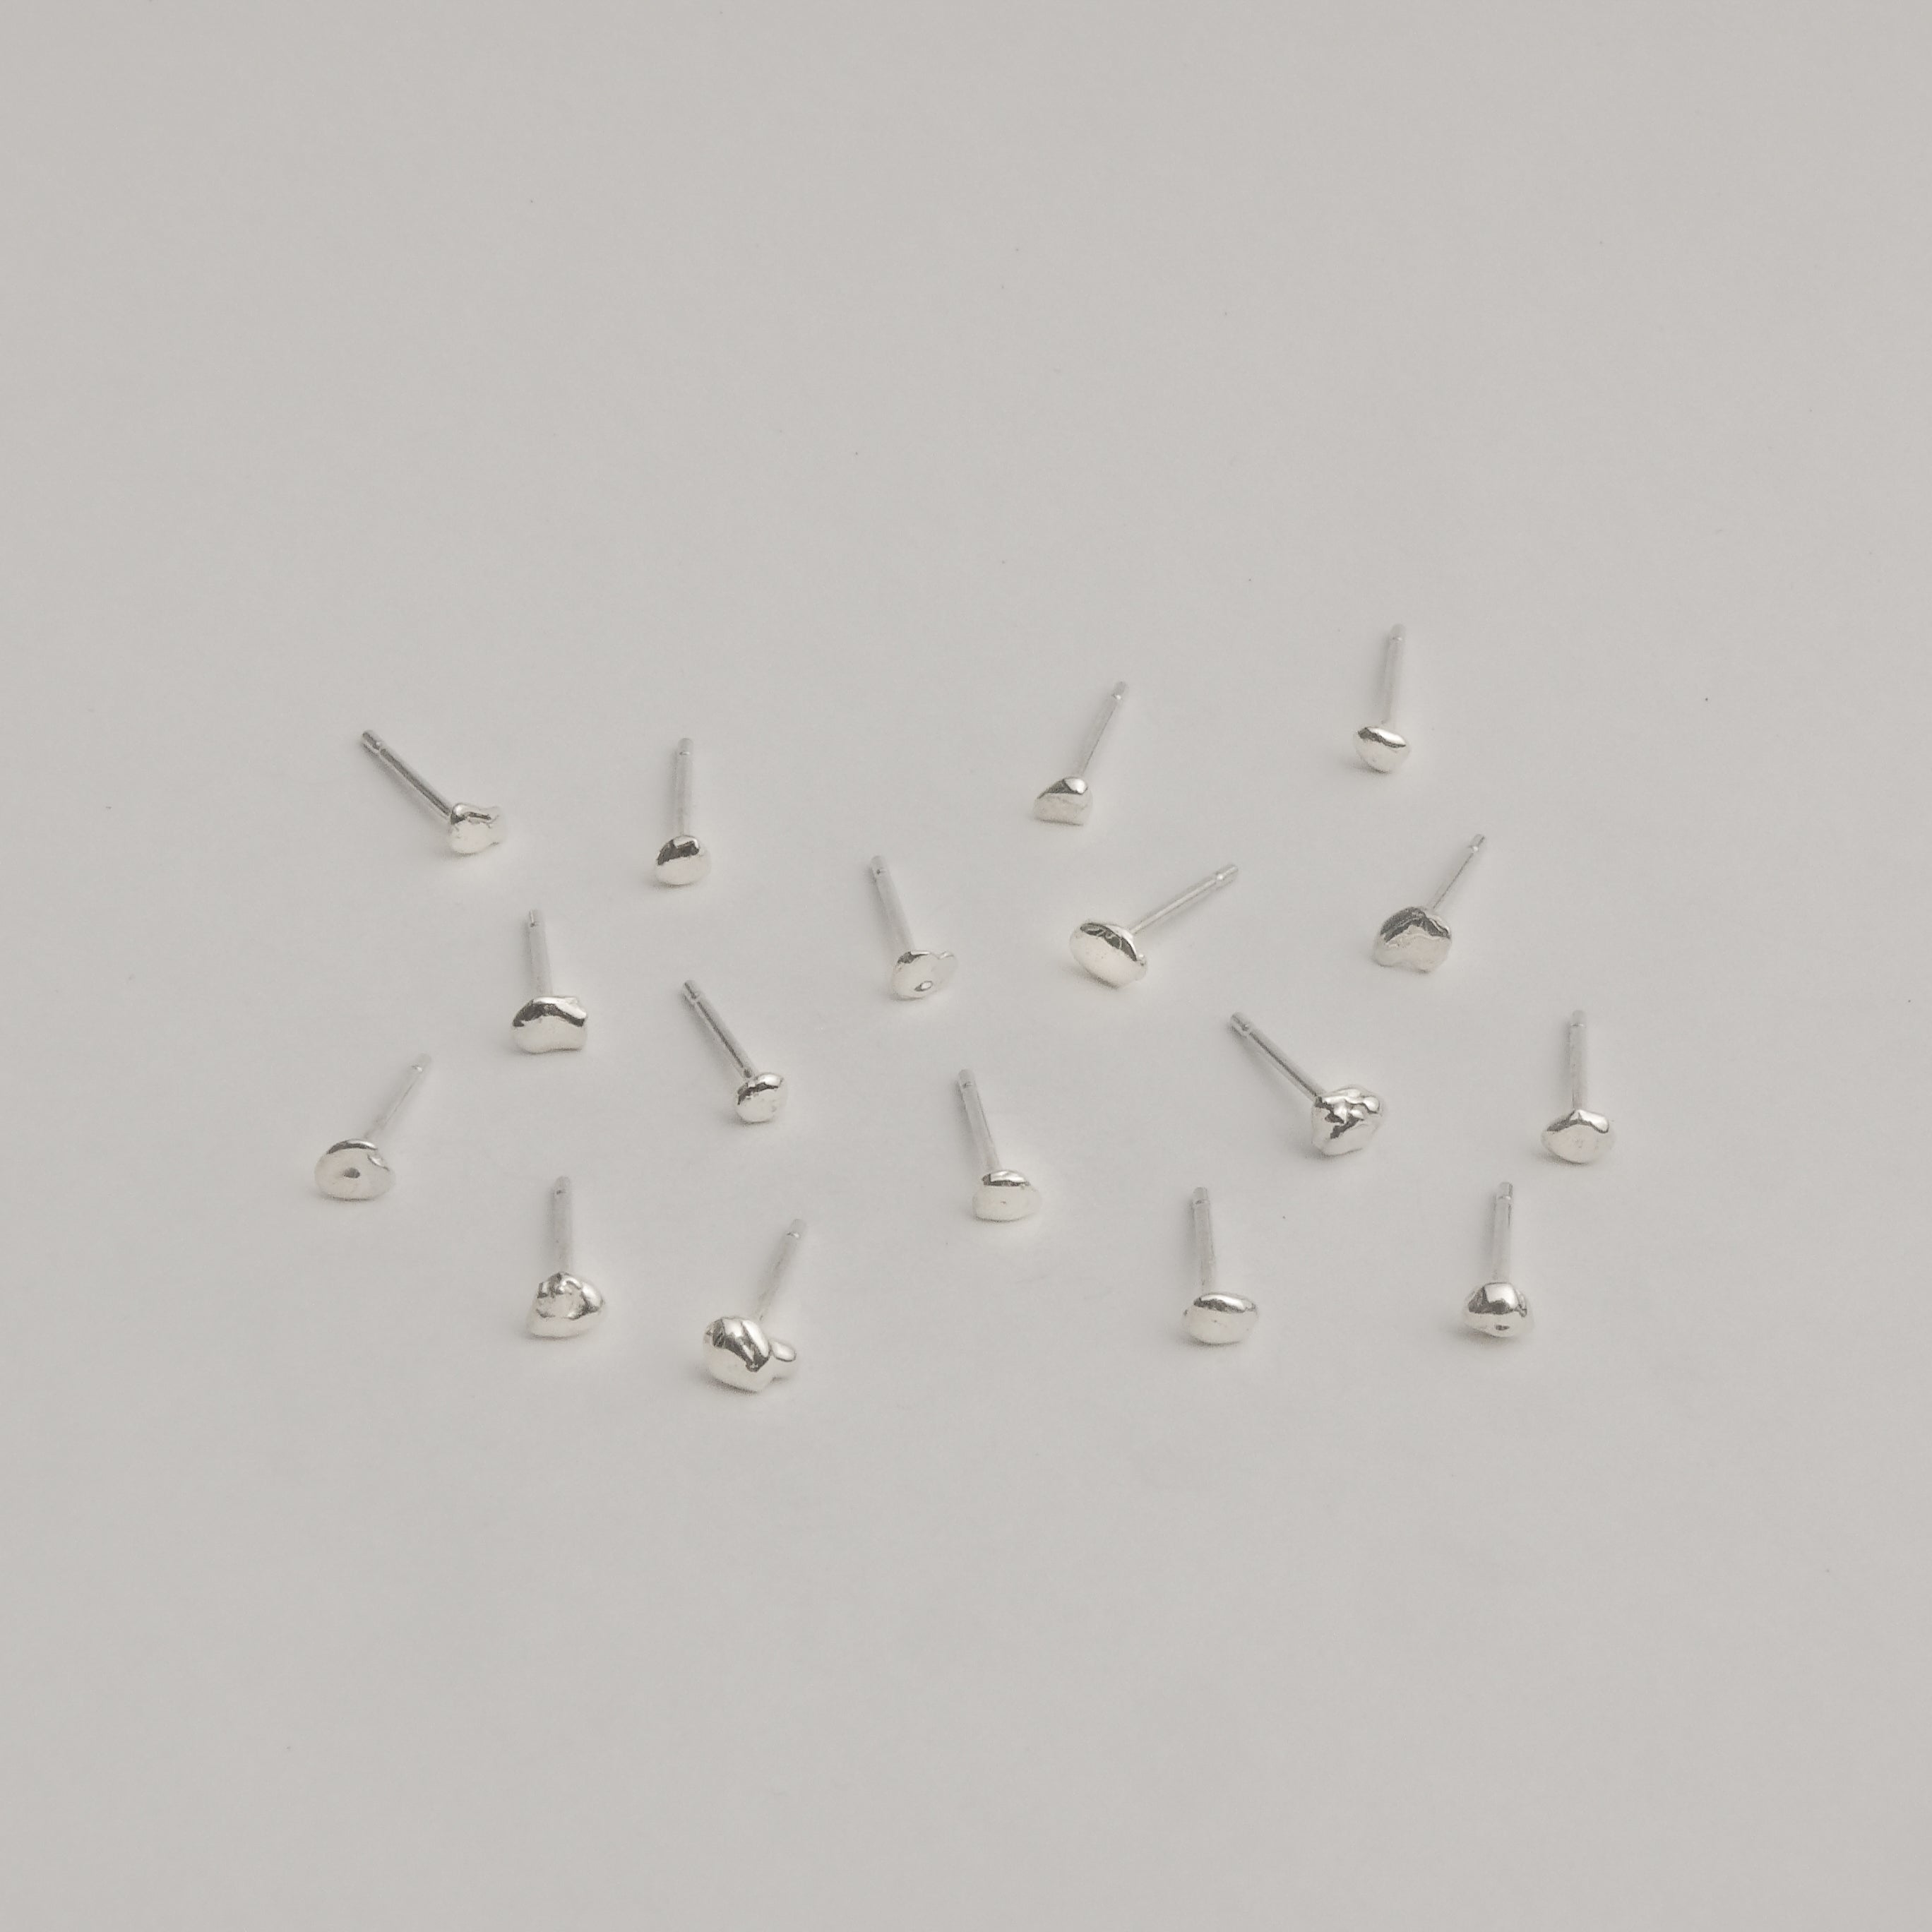 Made Line Jewelry, recycled sterling silver Grain Stud Earrings on white background